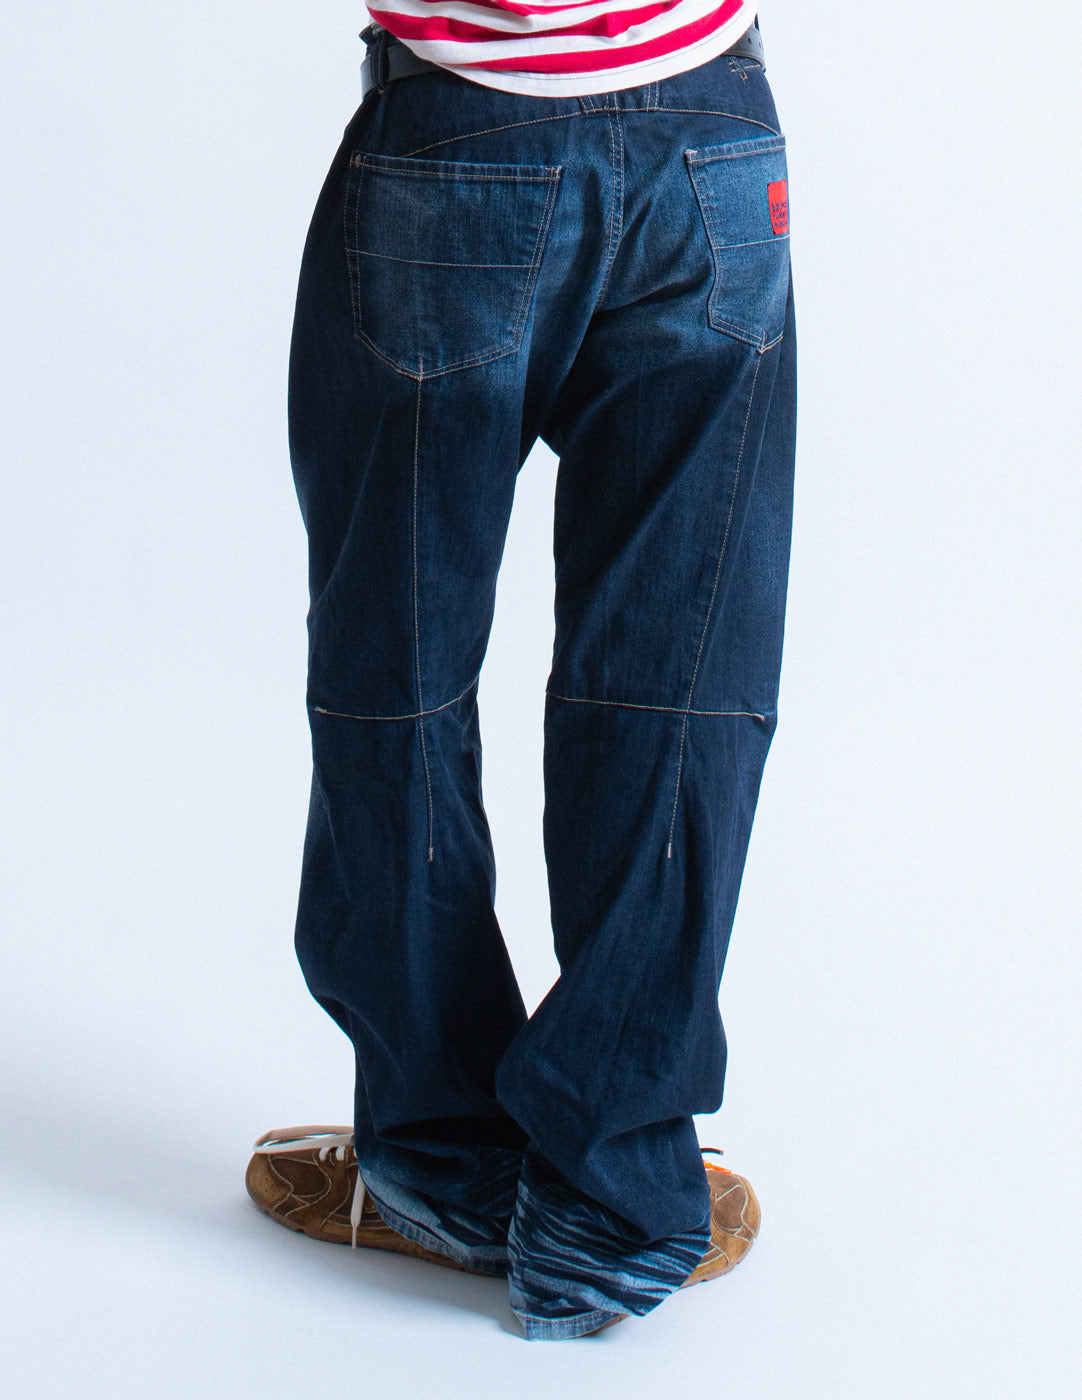 Marithé+François Girbaud vintage straight-legged jeans with back stitching back detail